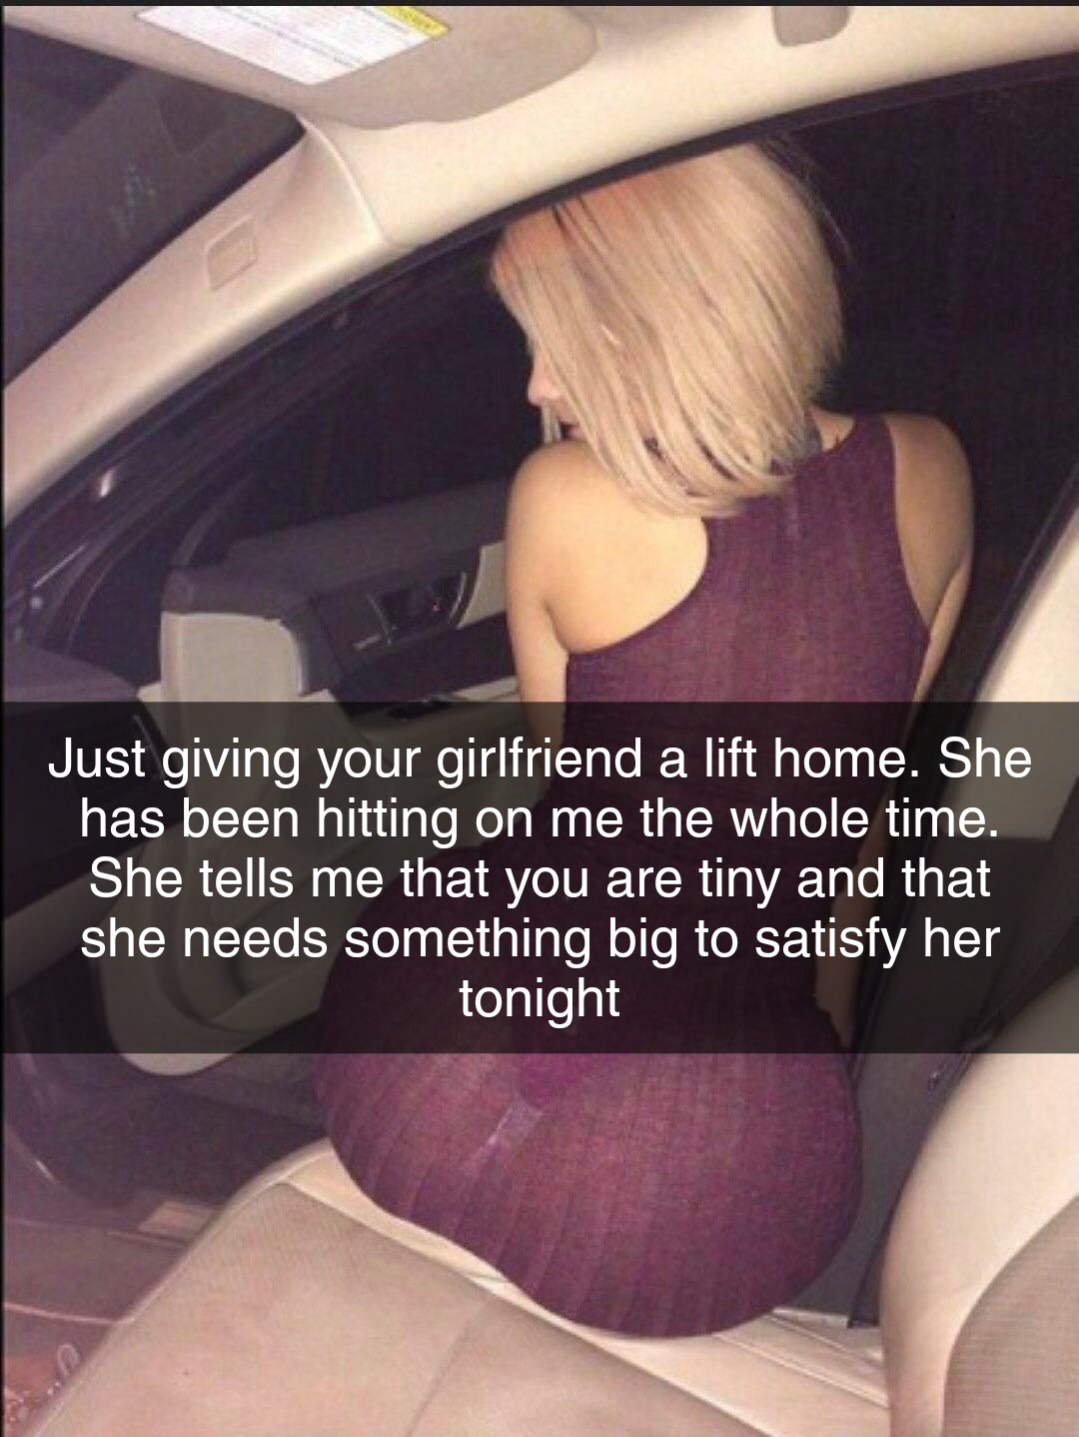 My friend who is an uber driver gave my girlfriend a lift home from mine when picture